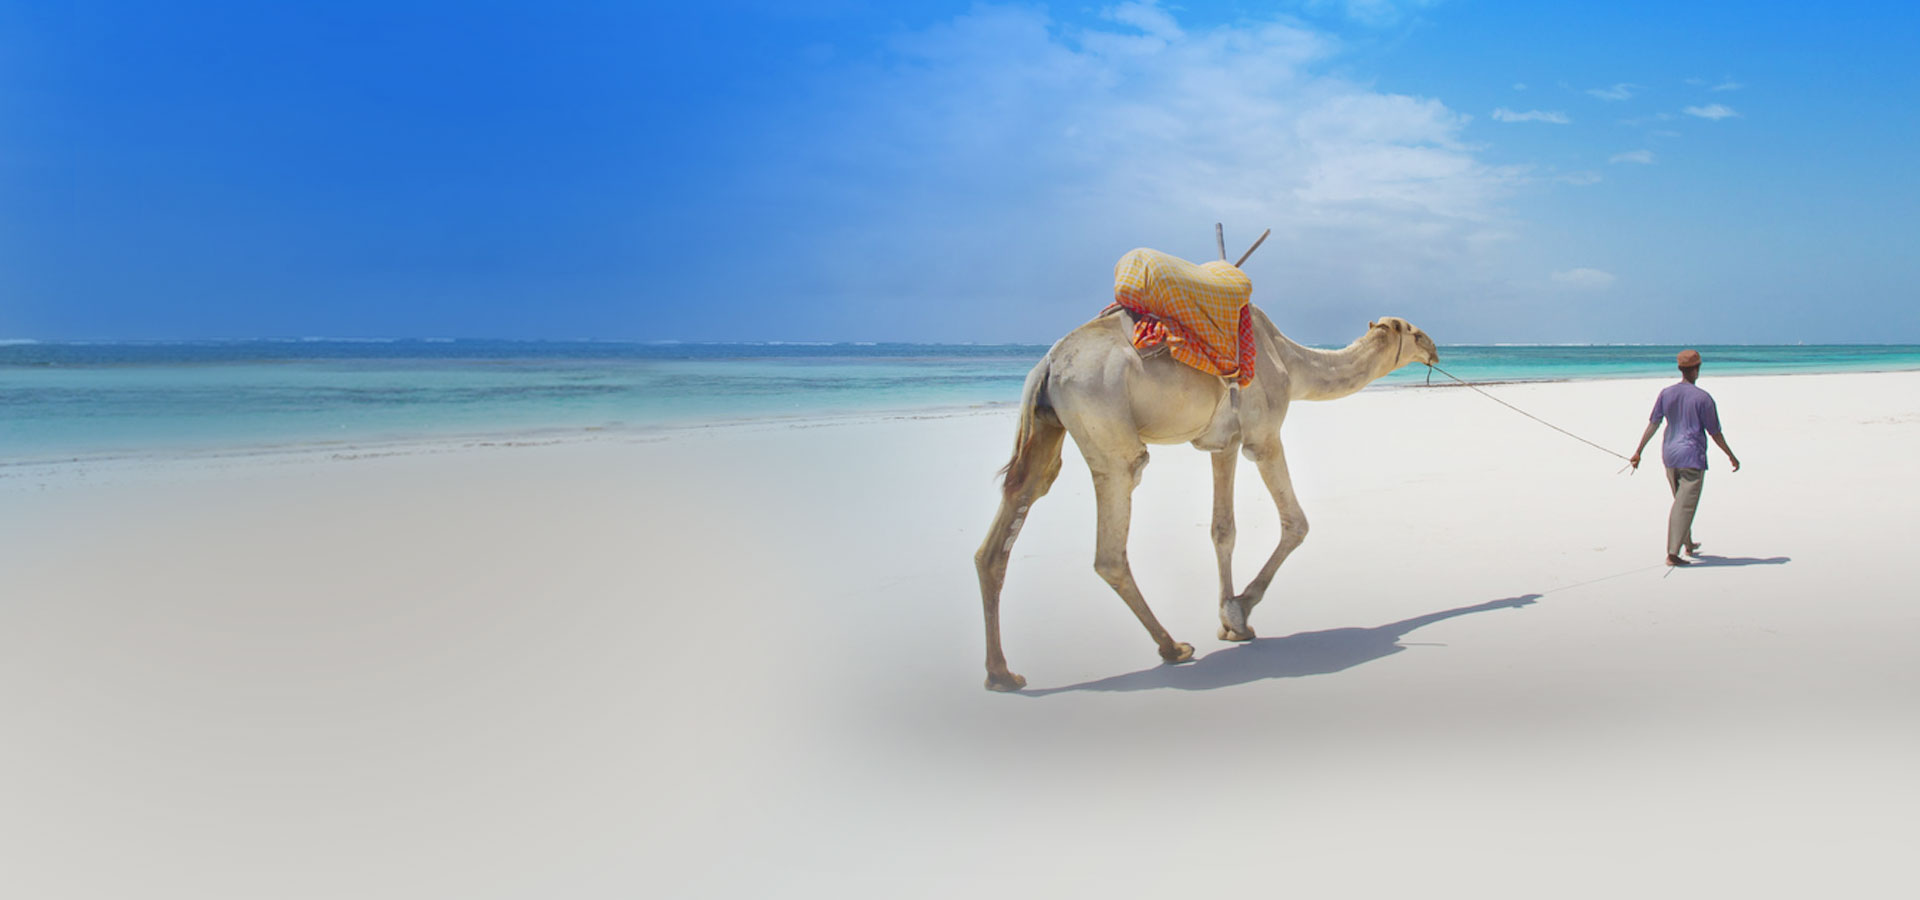 Camel Rides on The Beach